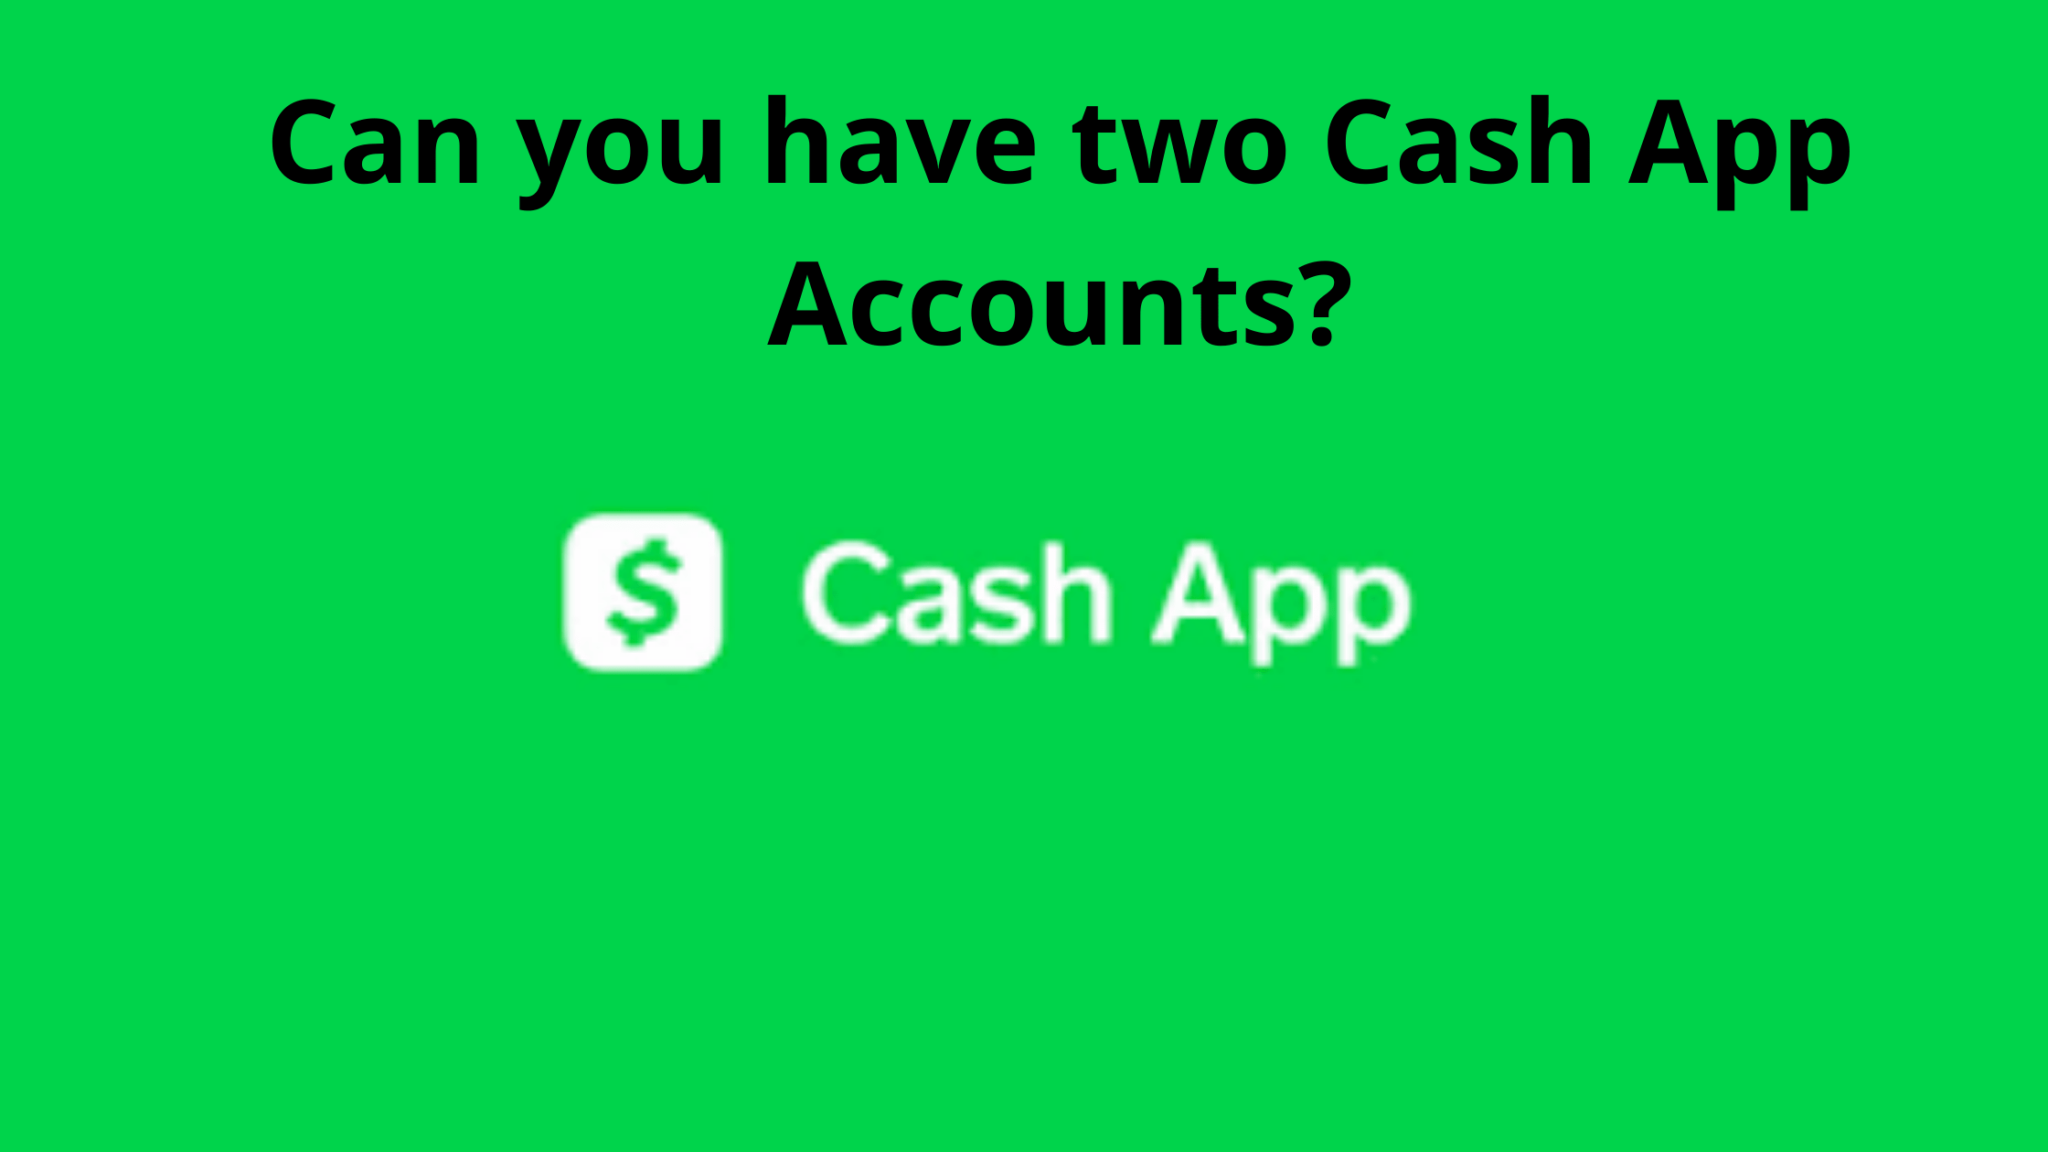 Can You Have More Than One Cash App Account?